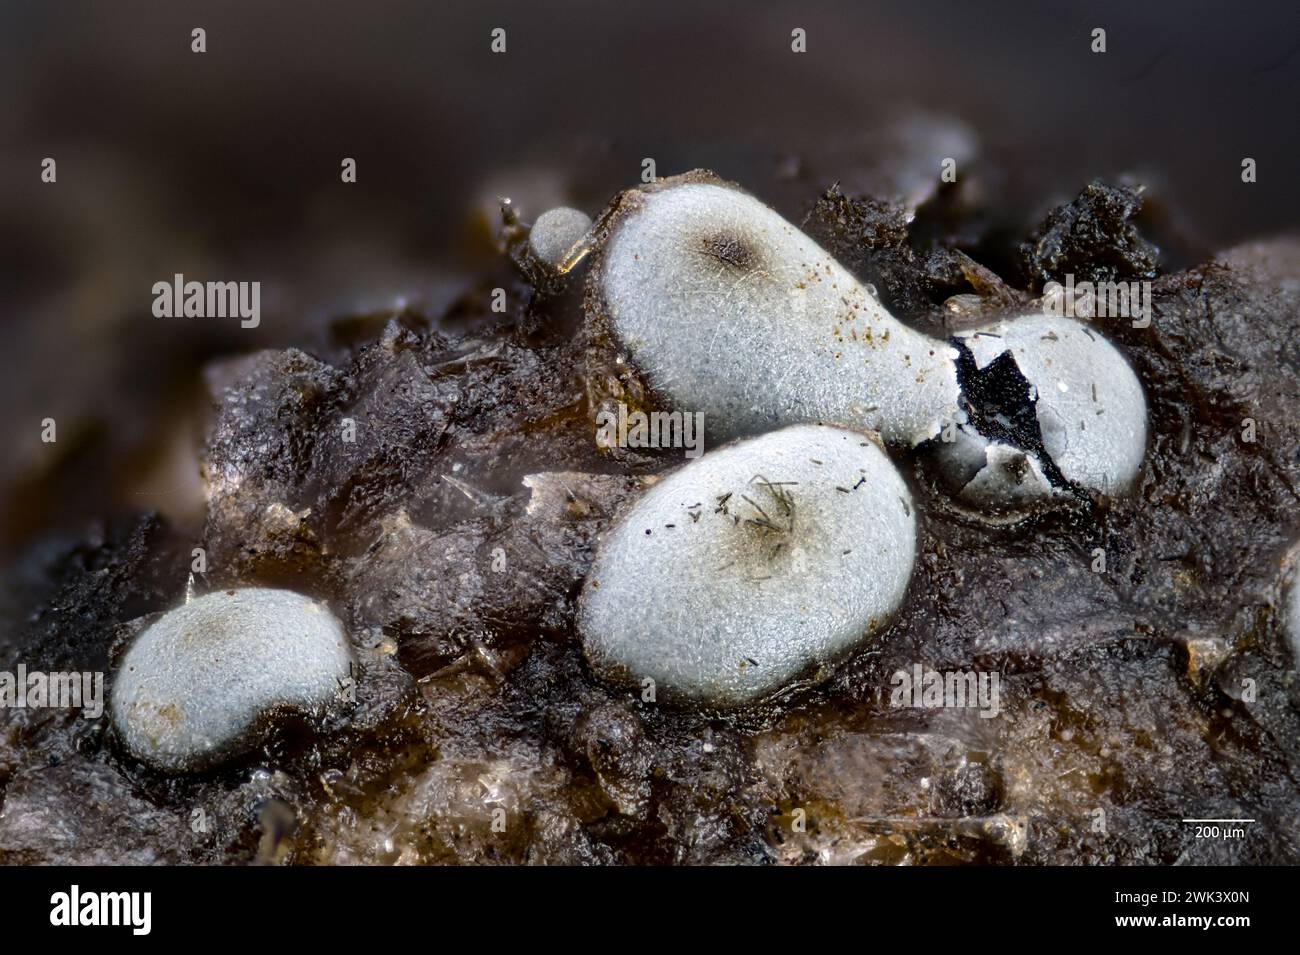 Sporocarps of the slime mold Diderma effusum growing on a decaying leaf. Stock Photo